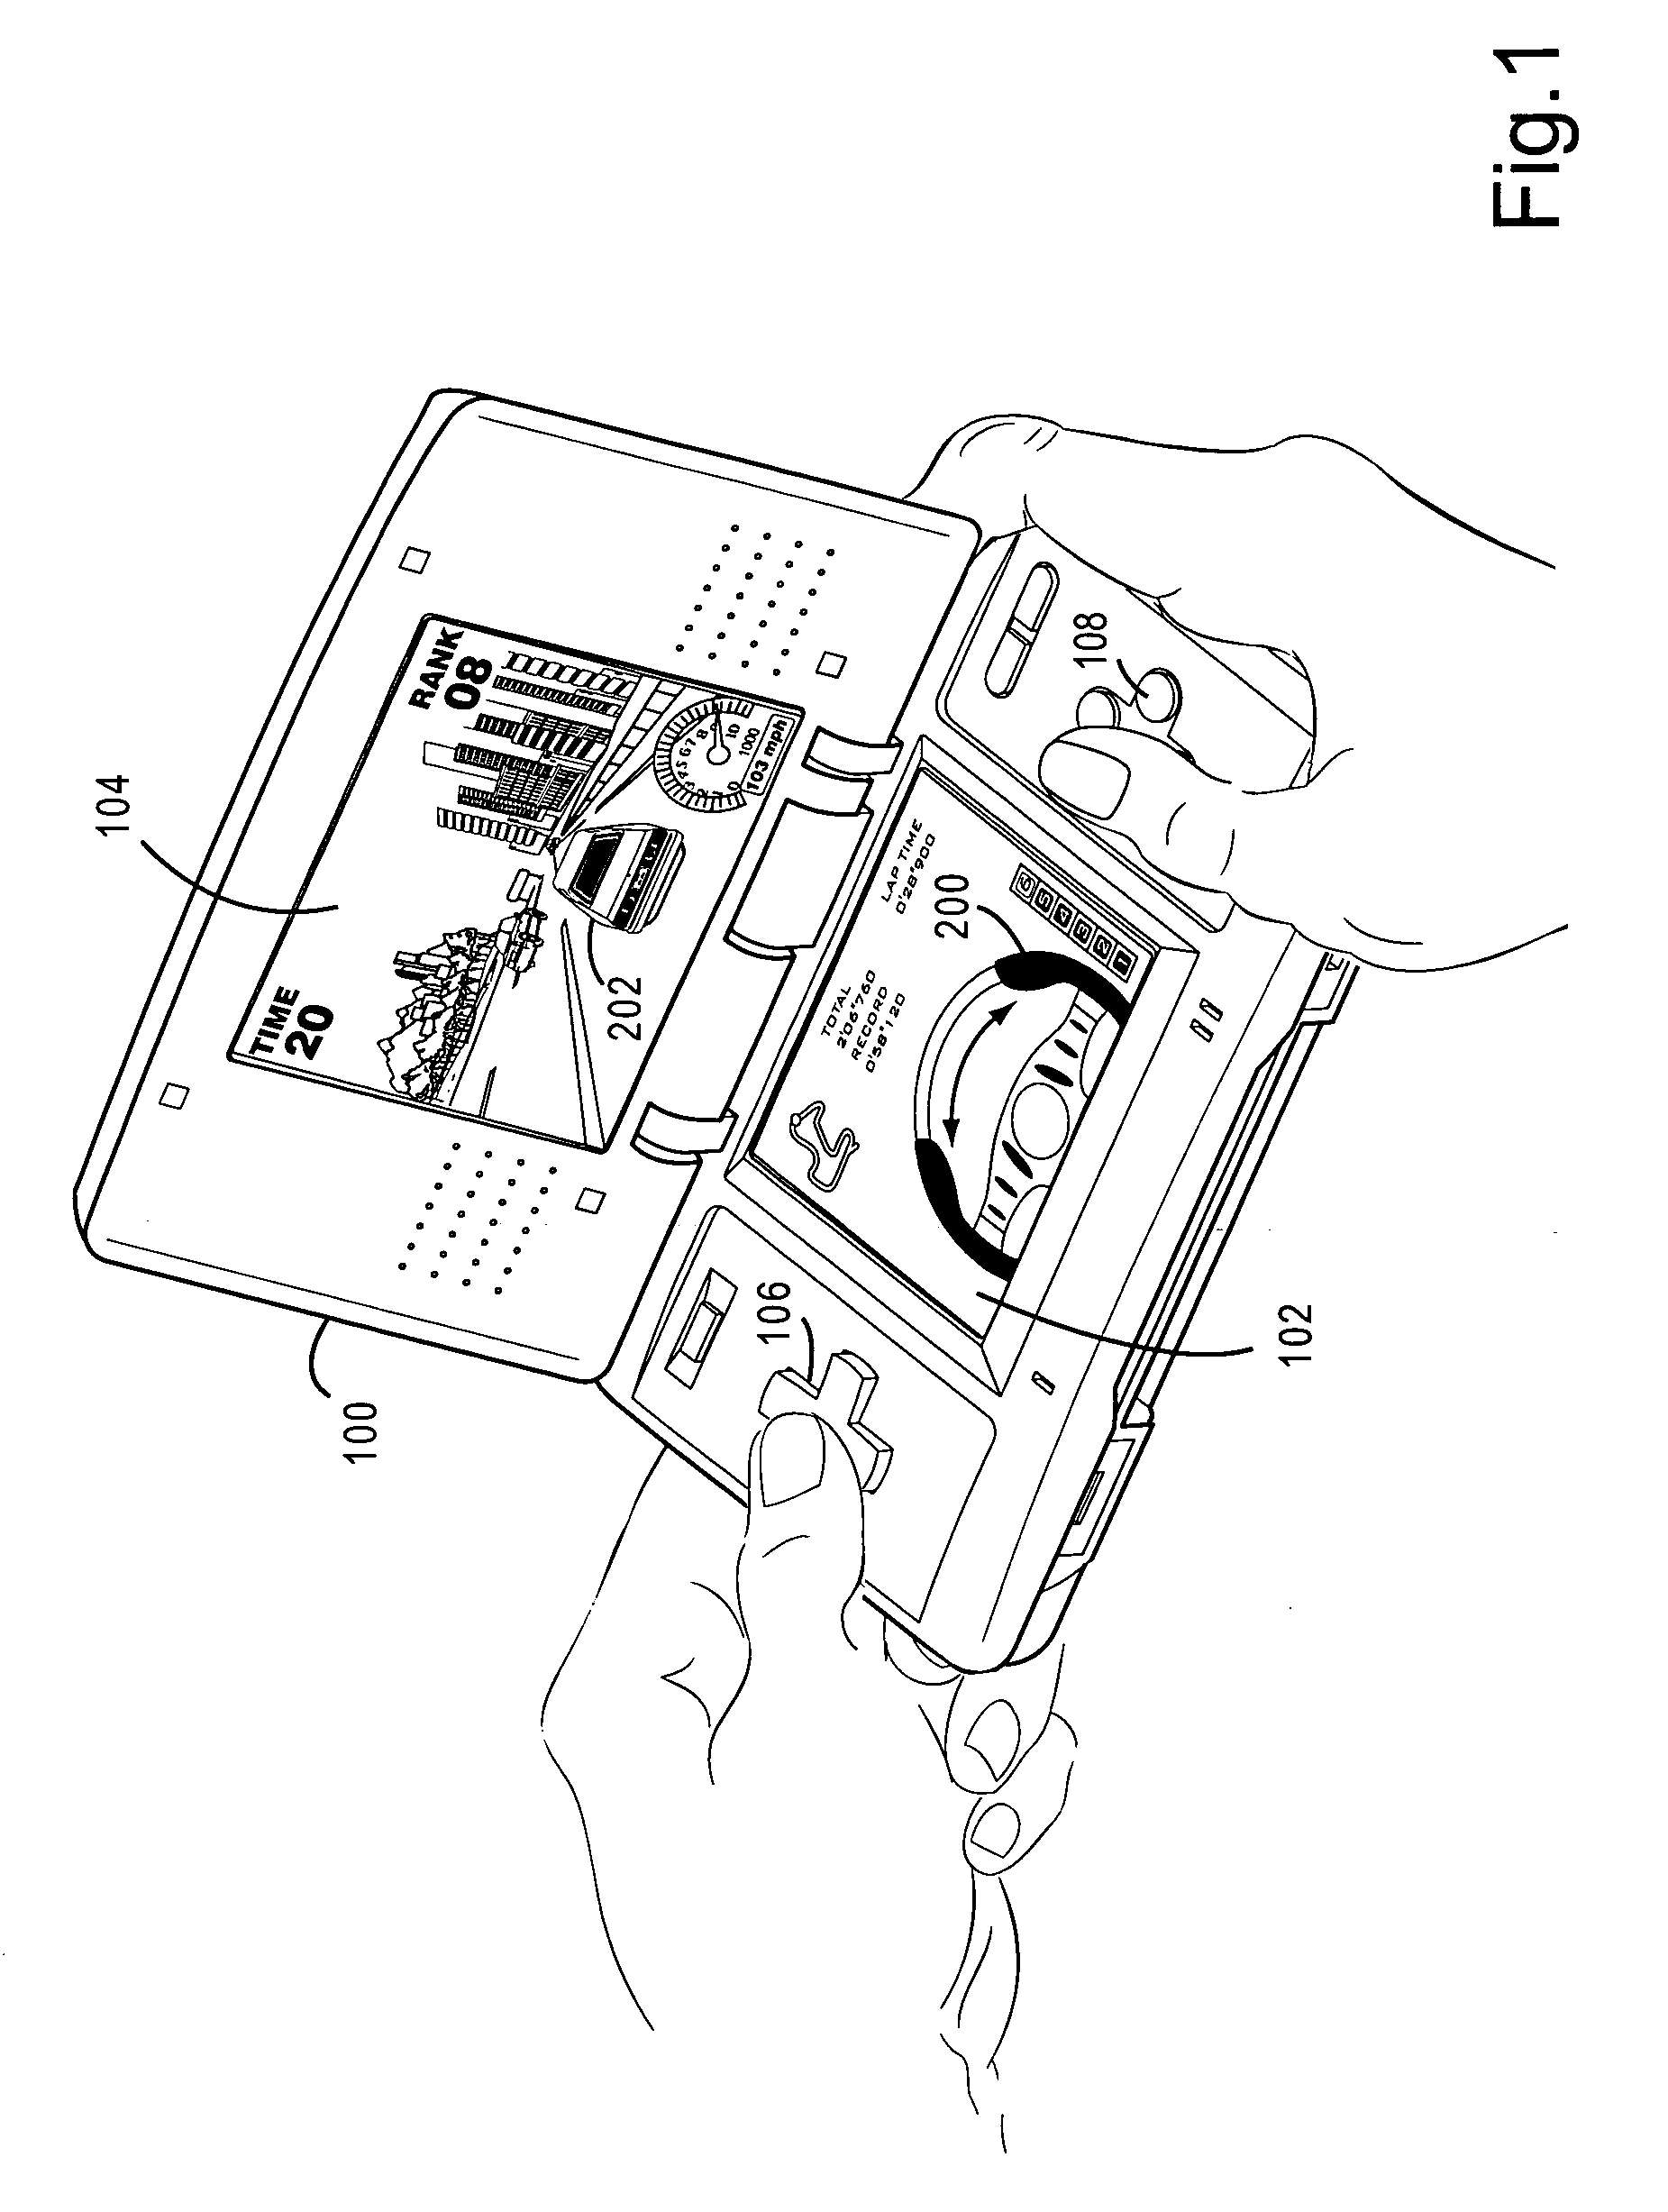 Driving game steering wheel simulation method and apparatus